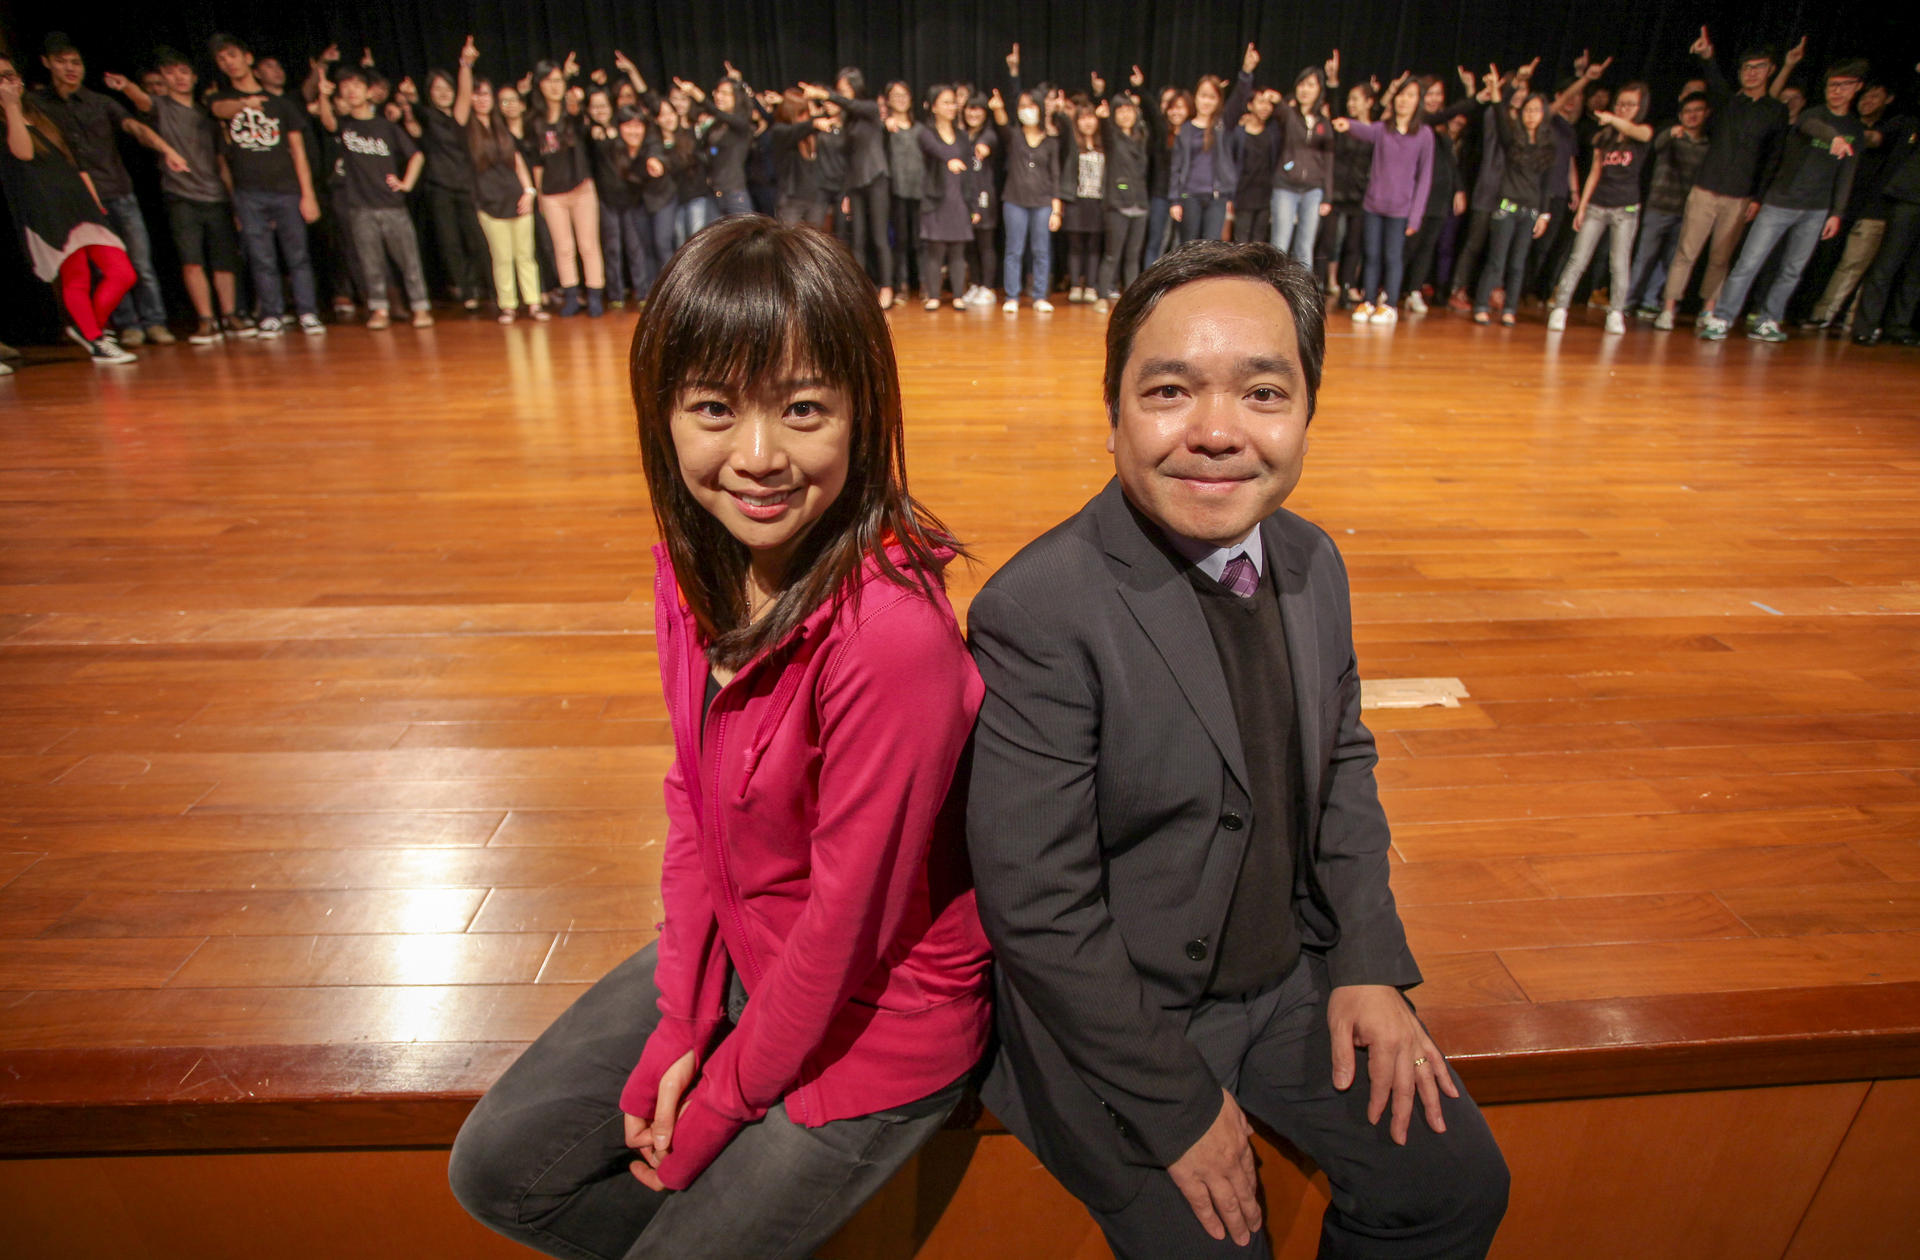 Doctoral student and concert director BoBo Lo Po-yan (left) with associate vice-president Joshua Mok Ka-ho. Photo: SCMP Pictures